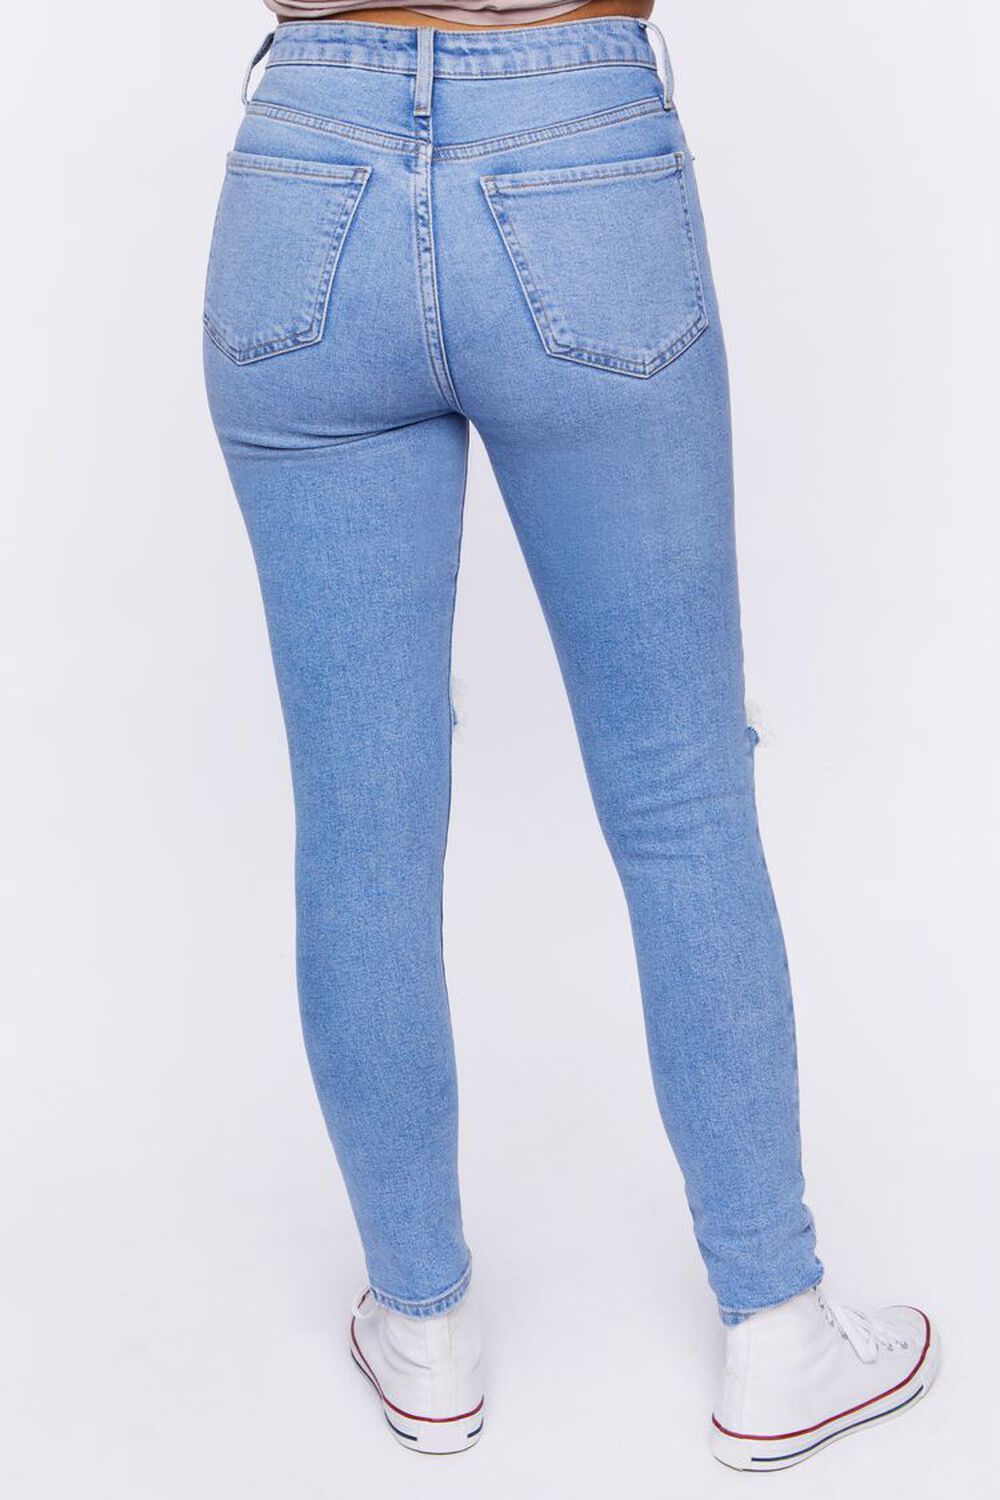 Recycled Cotton Distressed Skinny Jeans, image 3